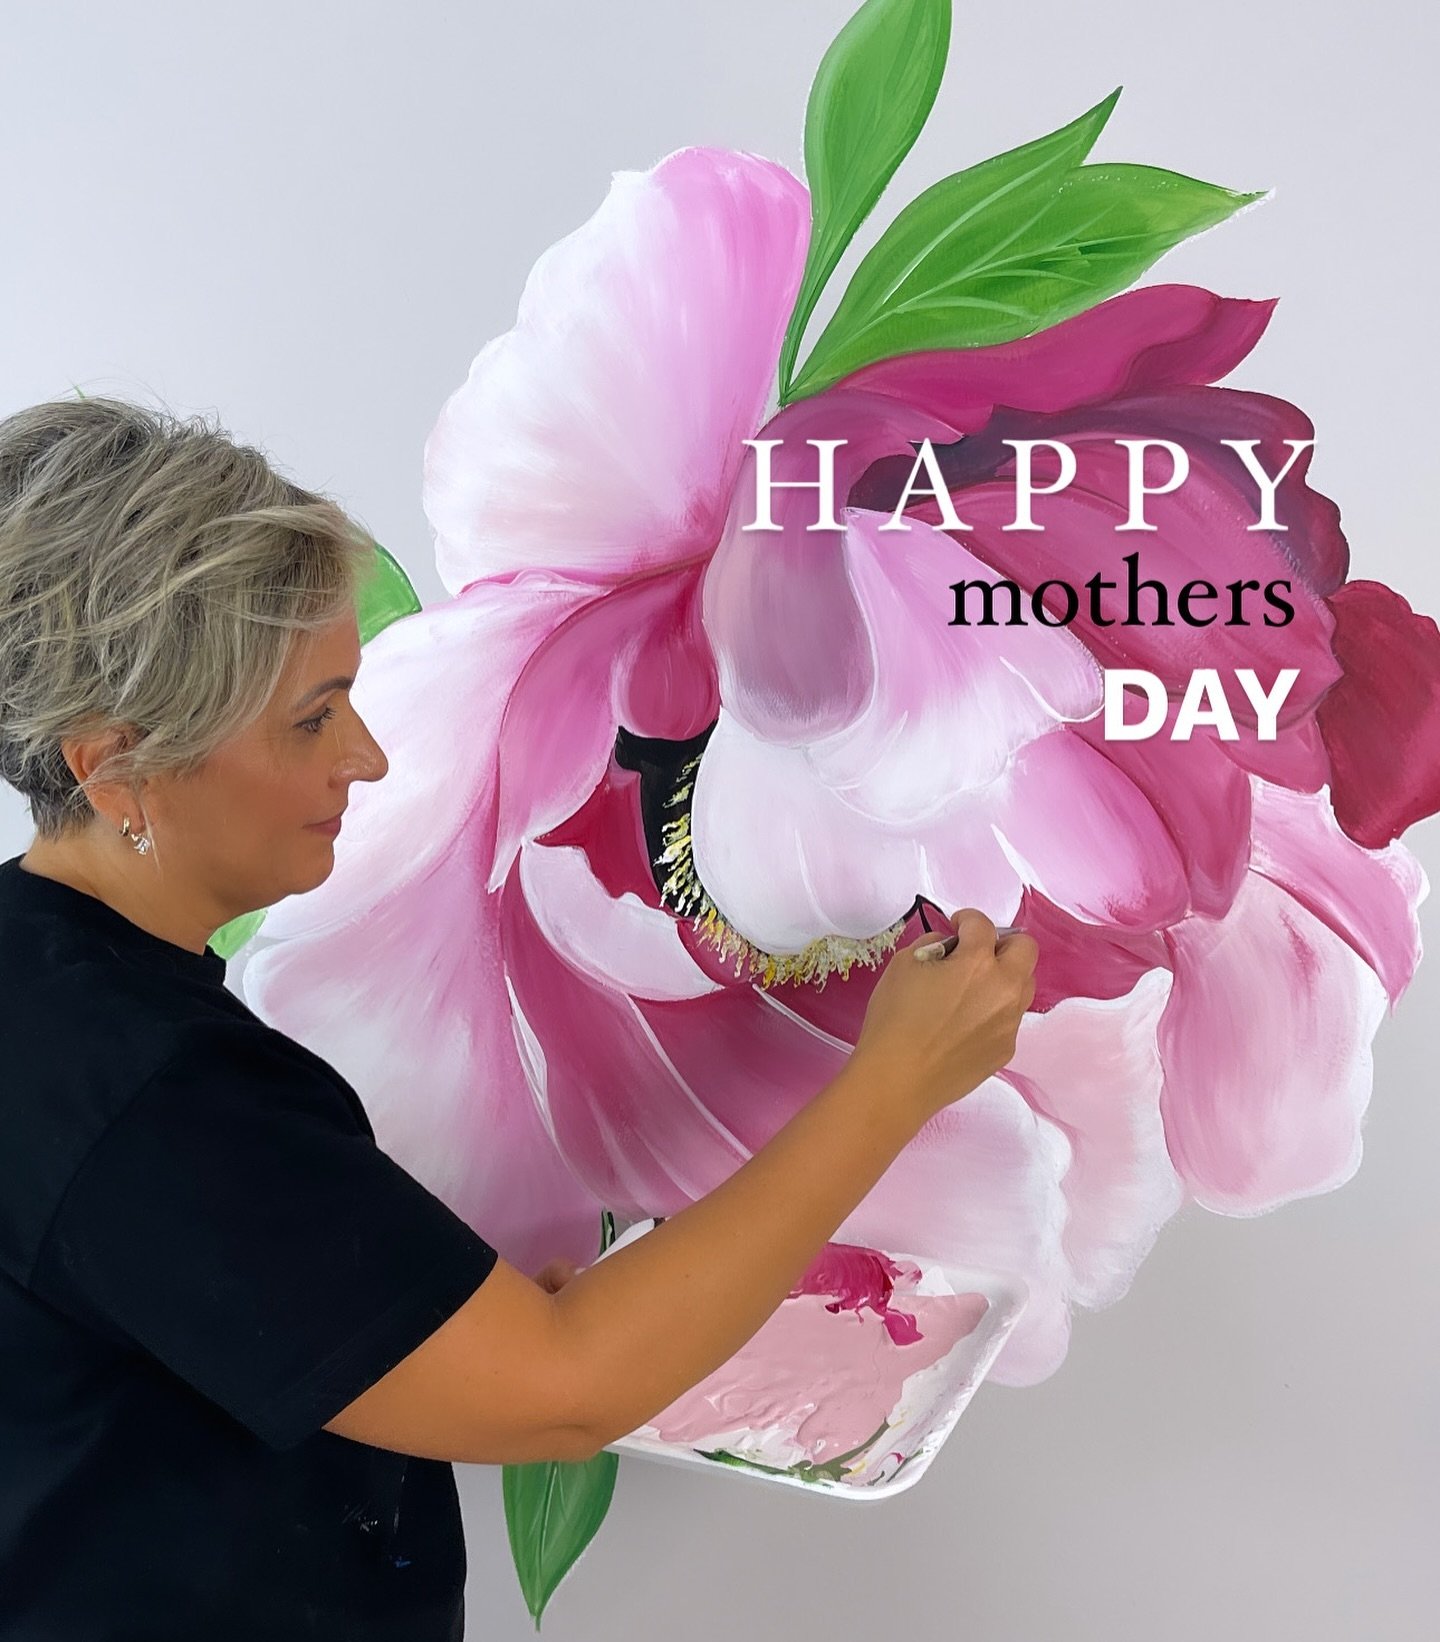 Happy Mother&rsquo;s Day to all the incredible momprenuers out there, balancing business brilliance with endless love and dedication. Your strength and passion inspire us all! 

Tag a momprenuer you know 💗

#momprenuer #MomBoss #womenbusinessowners 